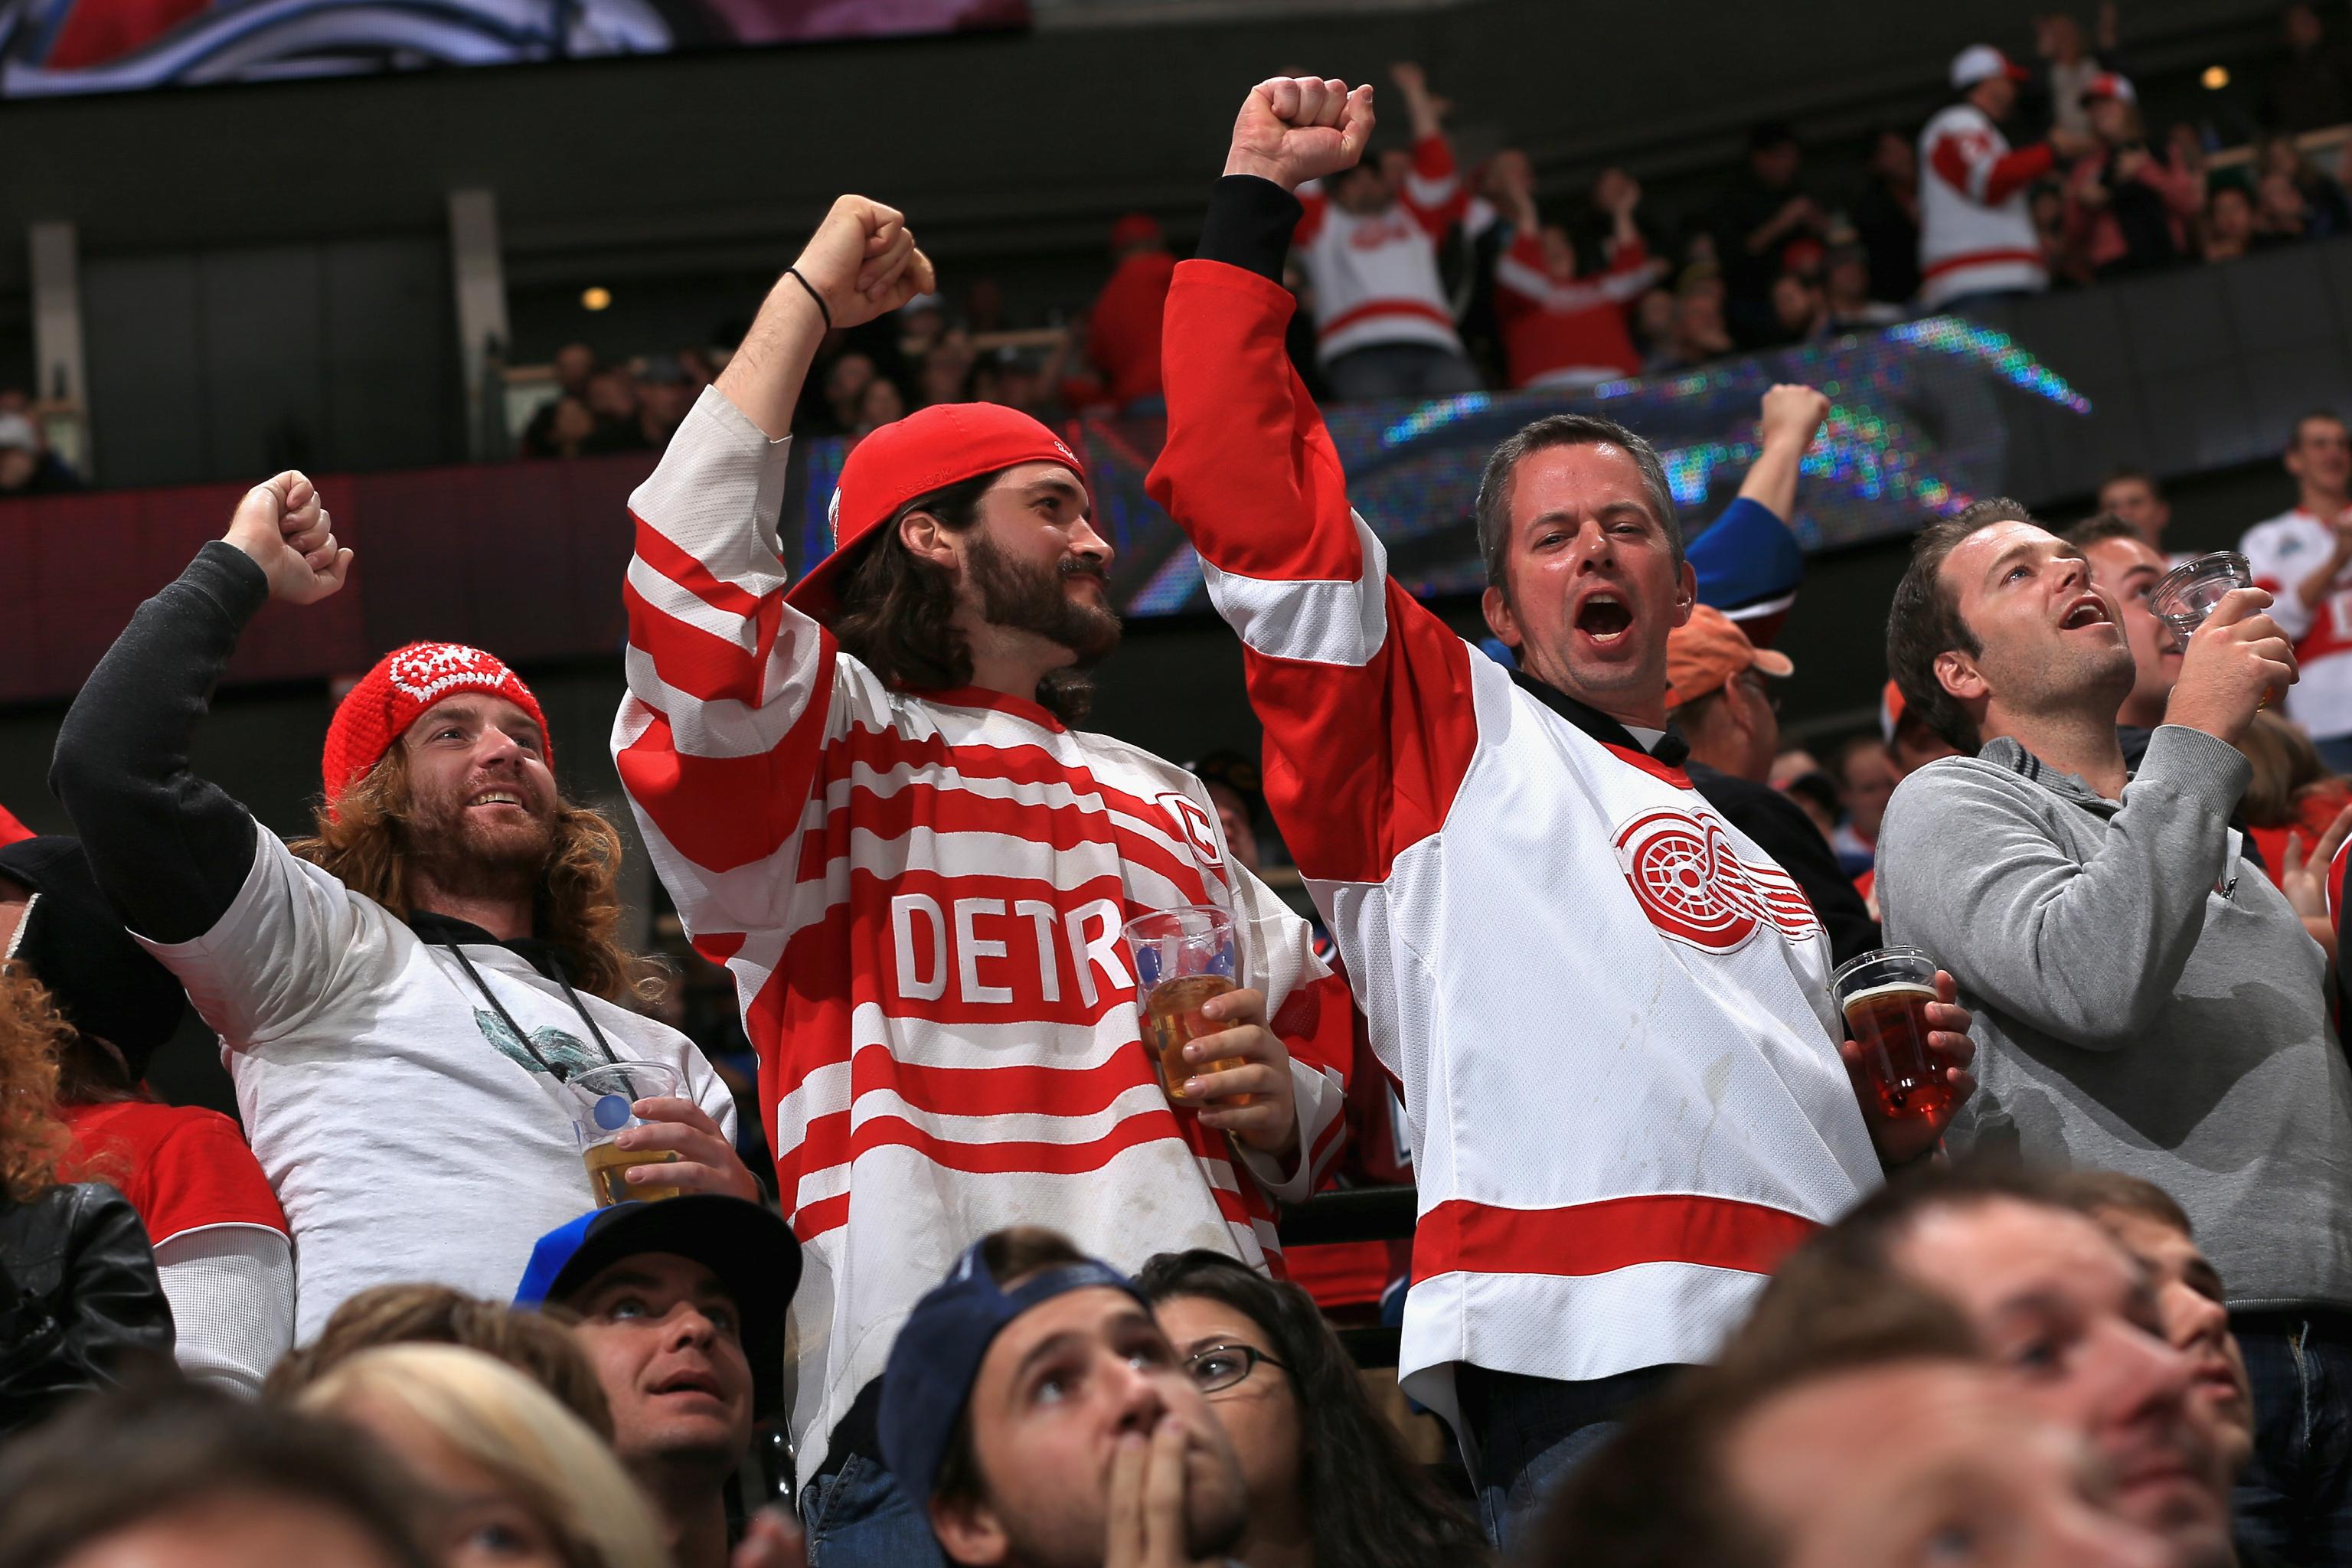 Should Red Wings fans be concerned about the Yzerplan?